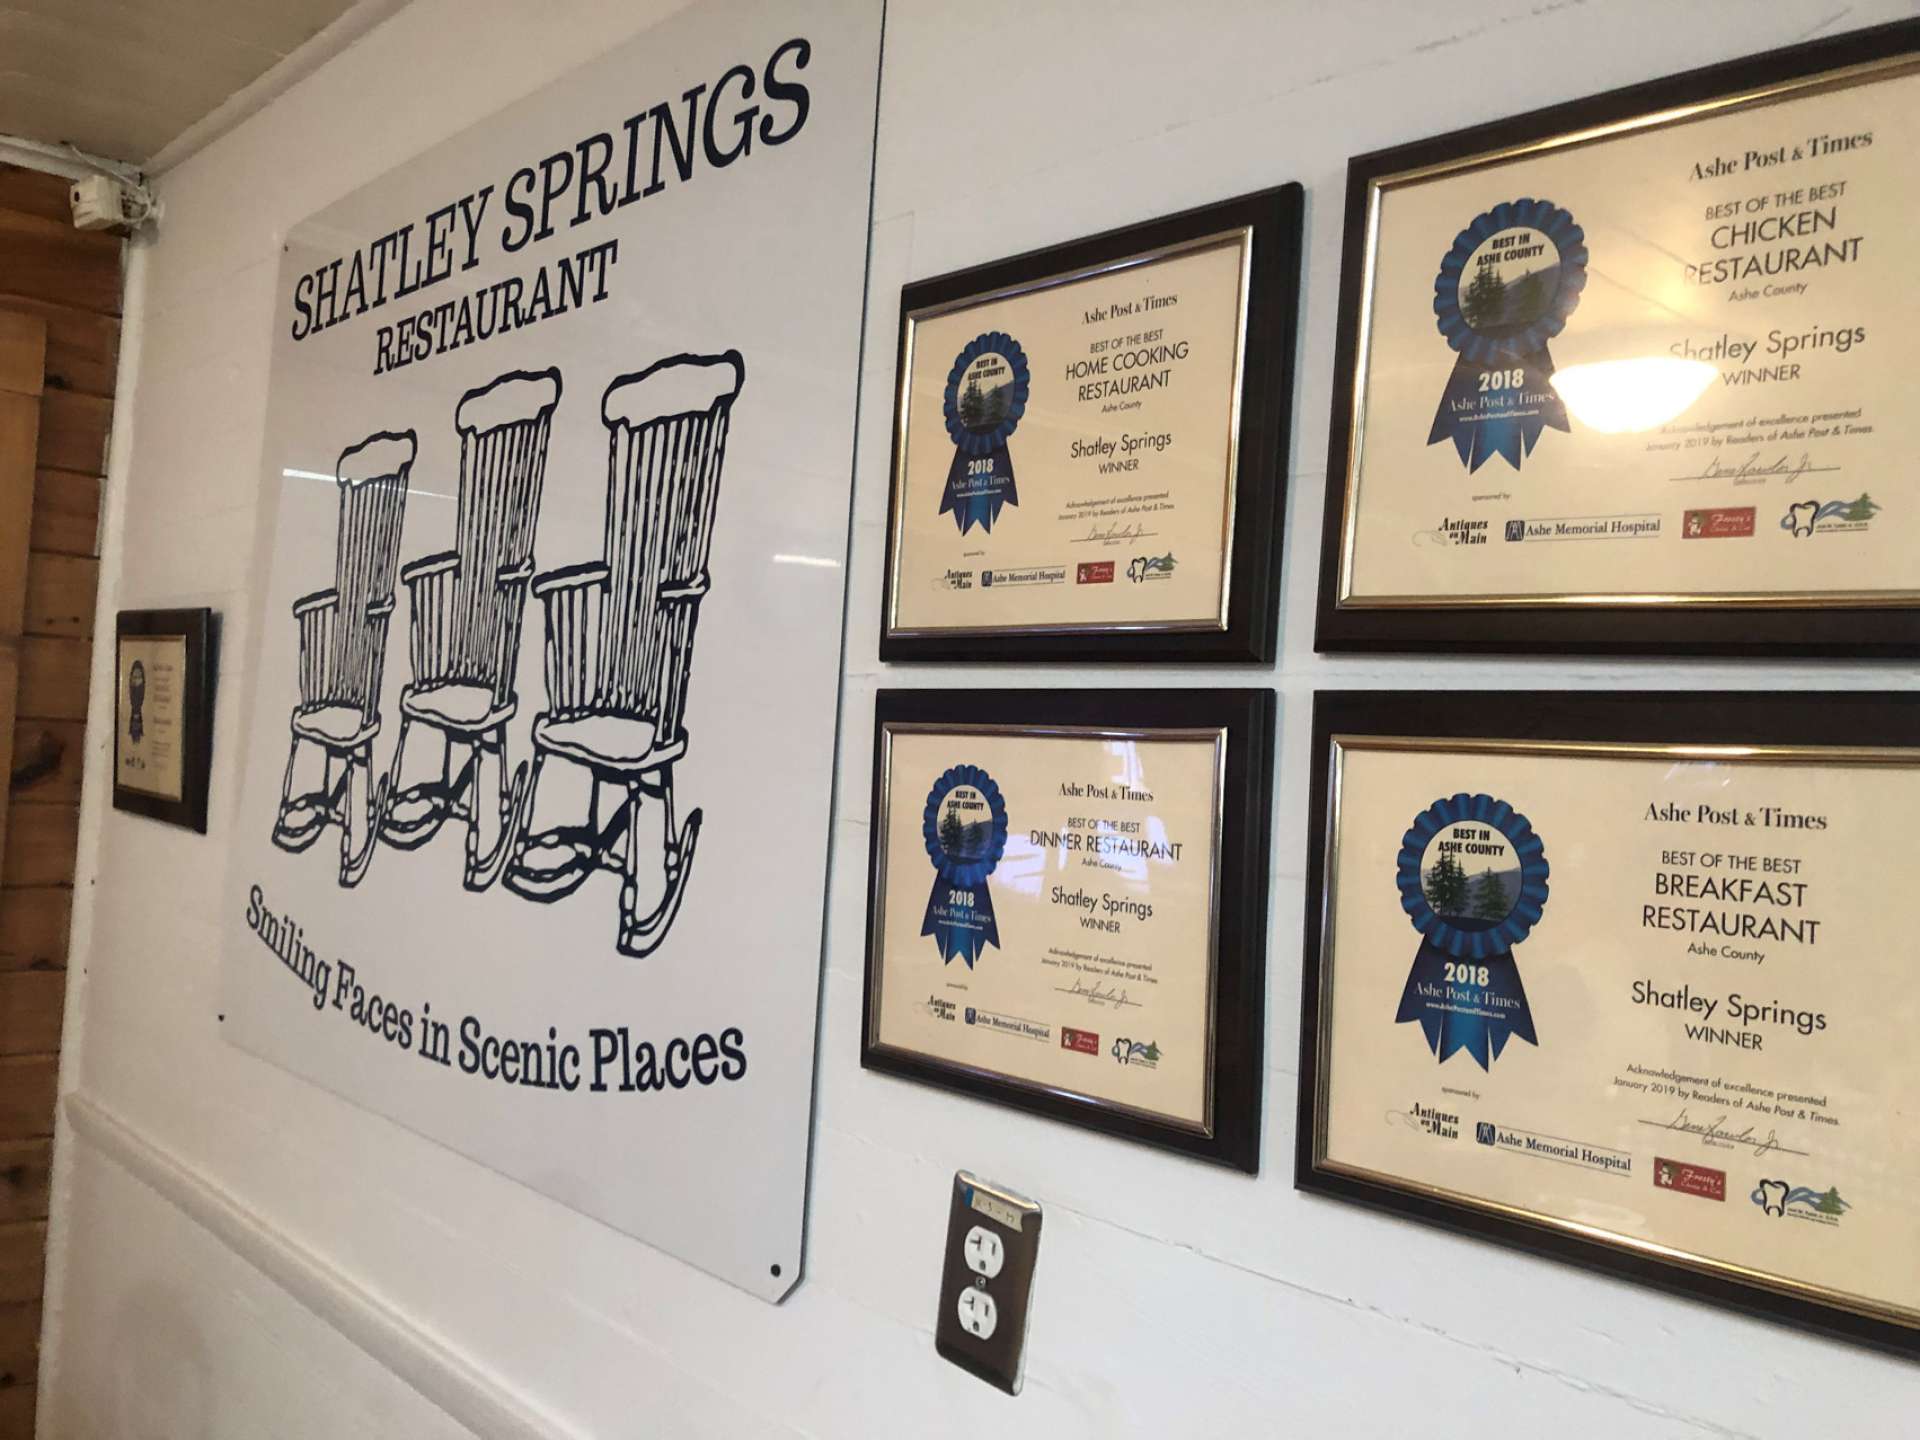 Shatley Springs Restaurant has been consistently recognized and honored for their scrumptious food over the years.